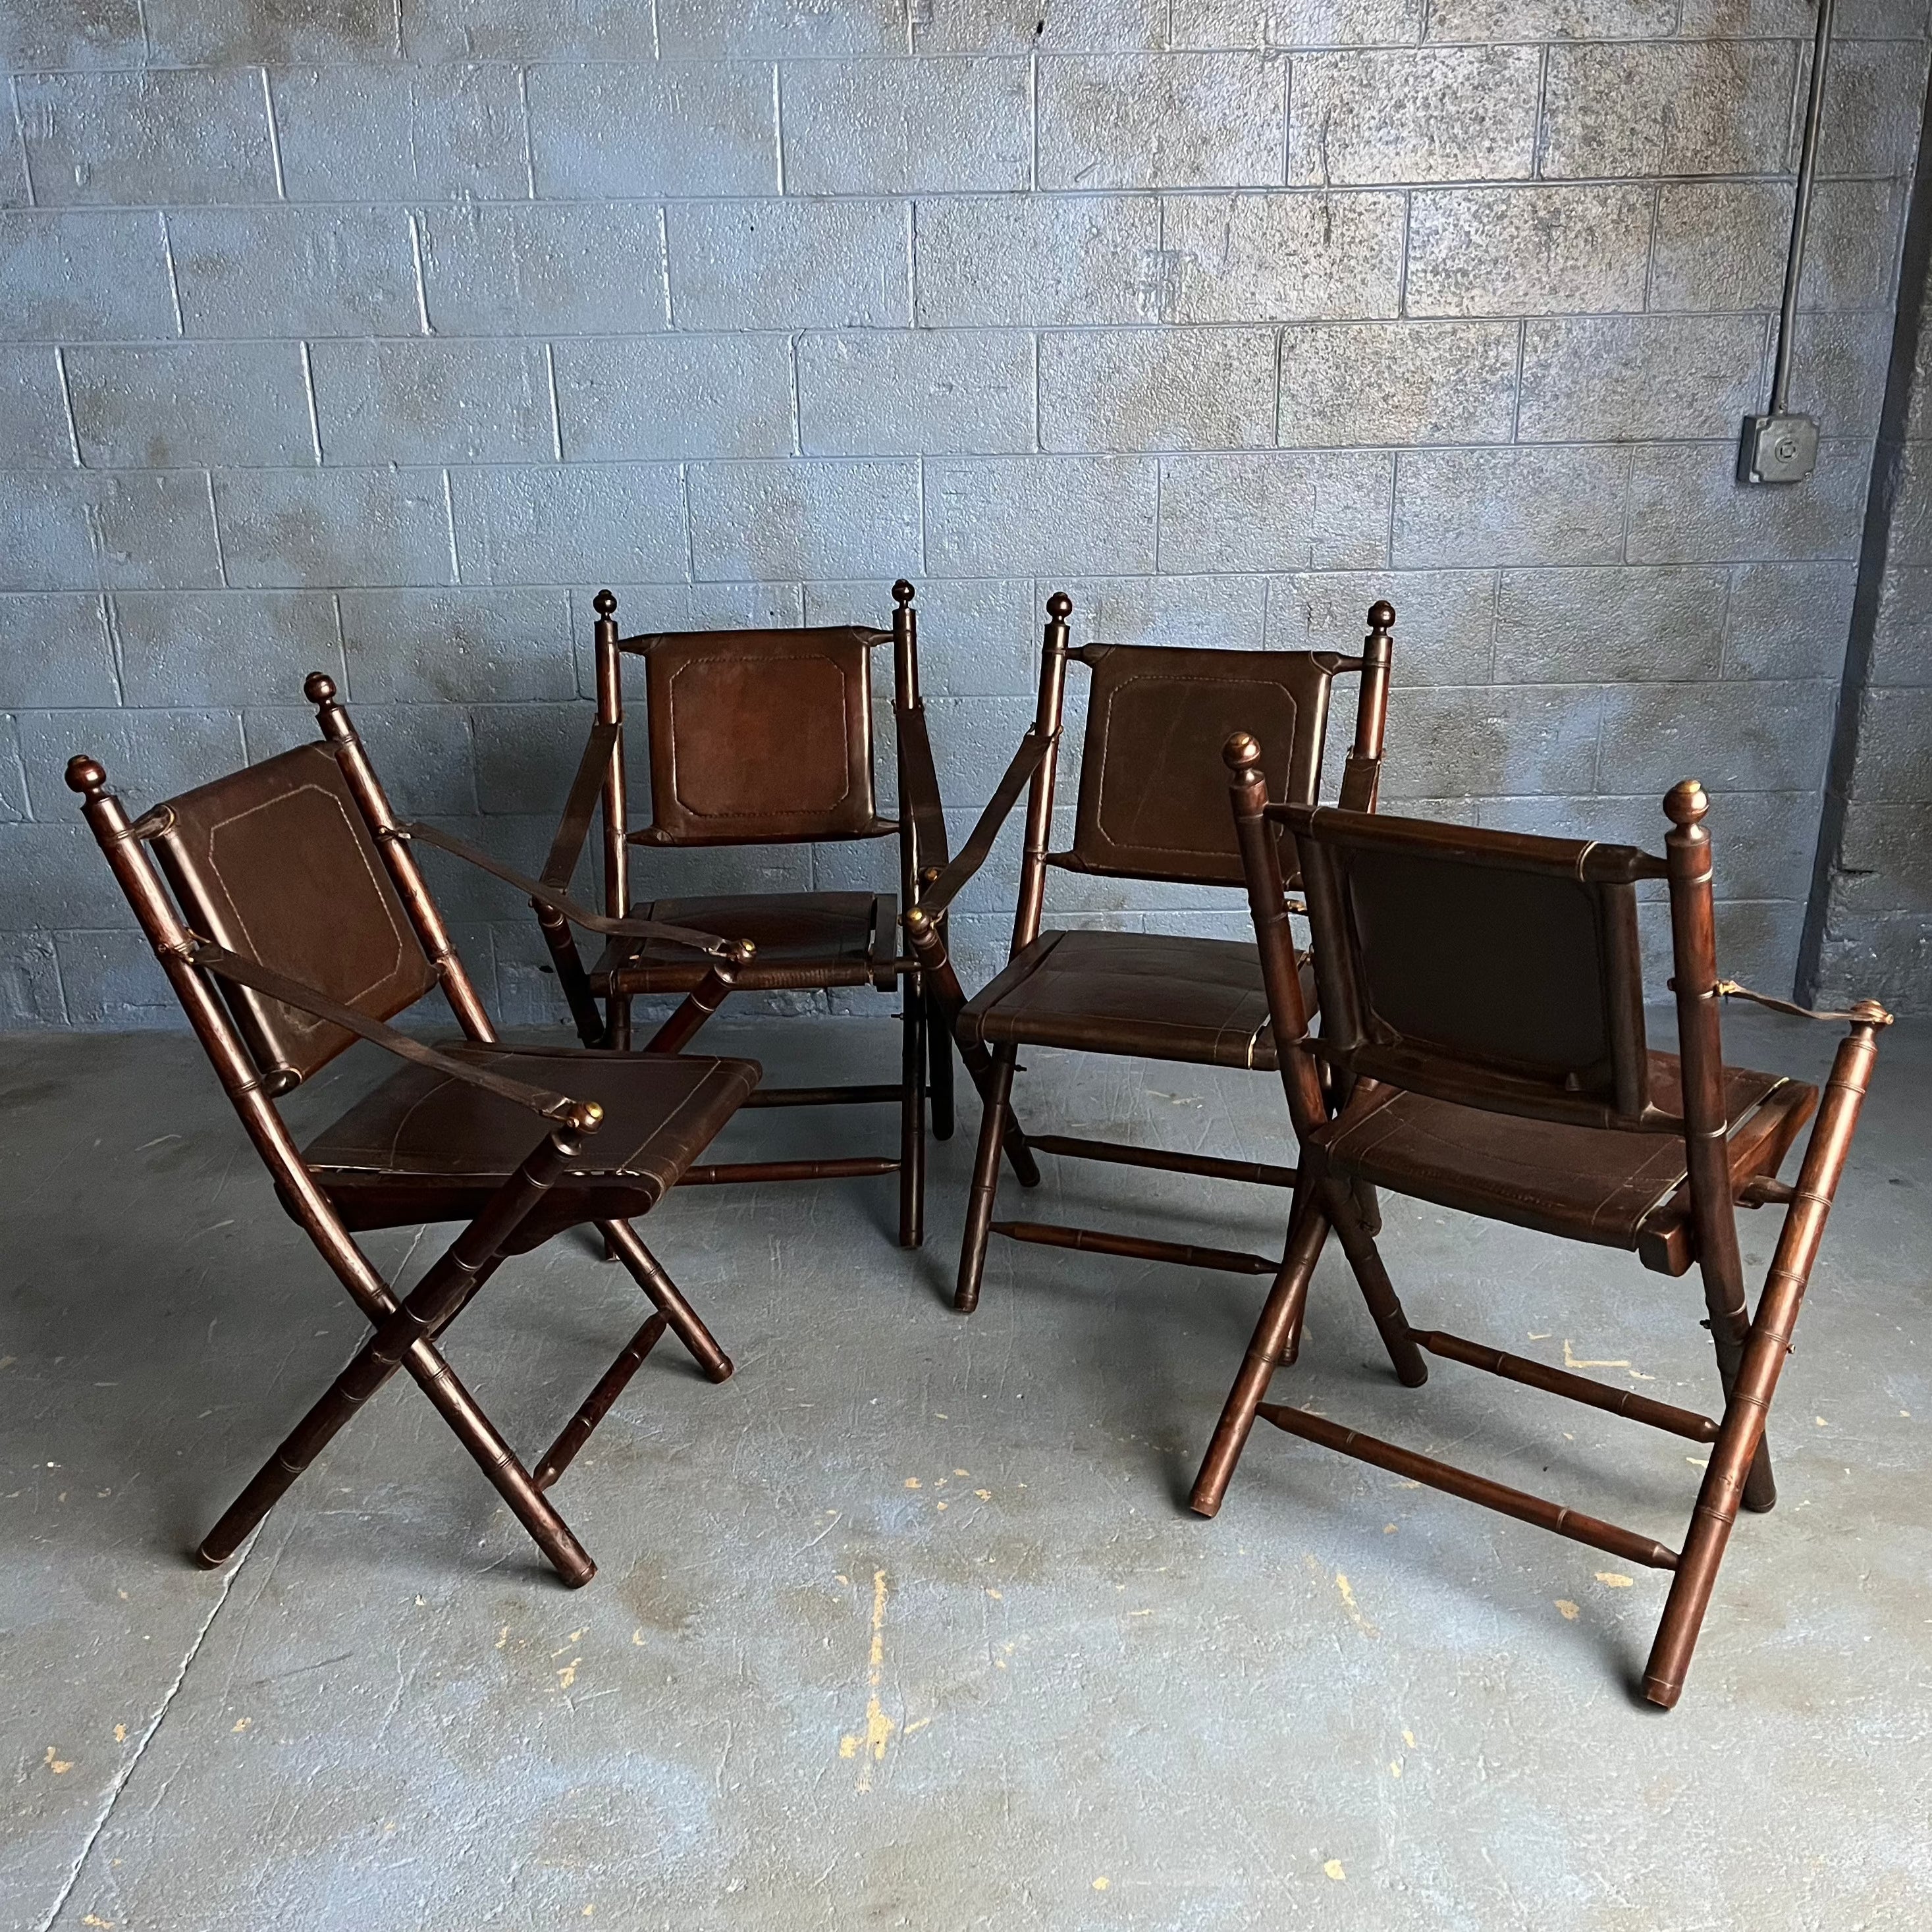 ON HOLD: Wood, leather, and brass Spanish Folding Chairs